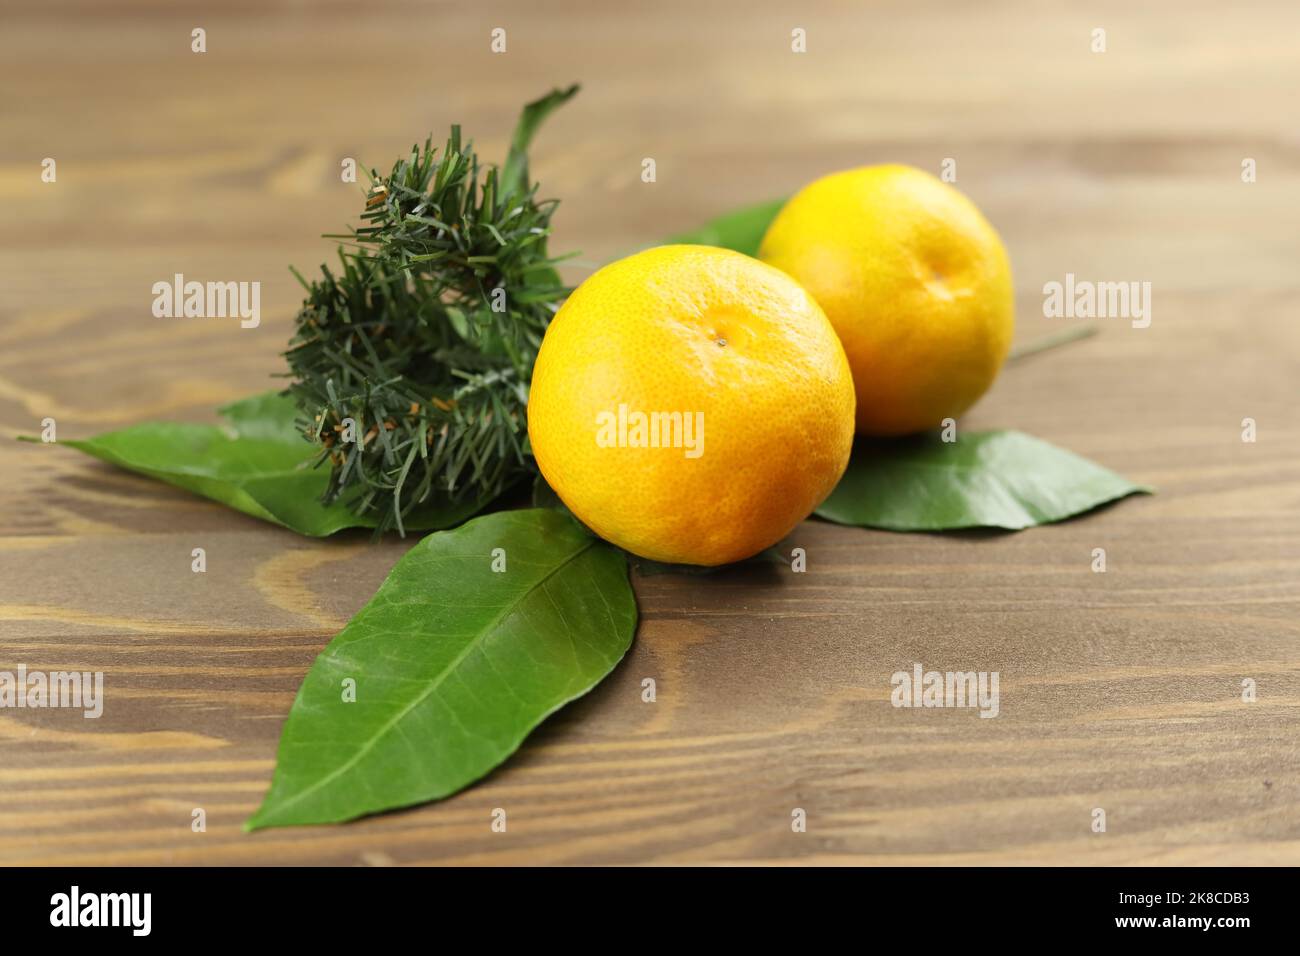 Christmas design of two whole mandarin or tangerine fruits, green leaves, fir tree on wooden background Stock Photo